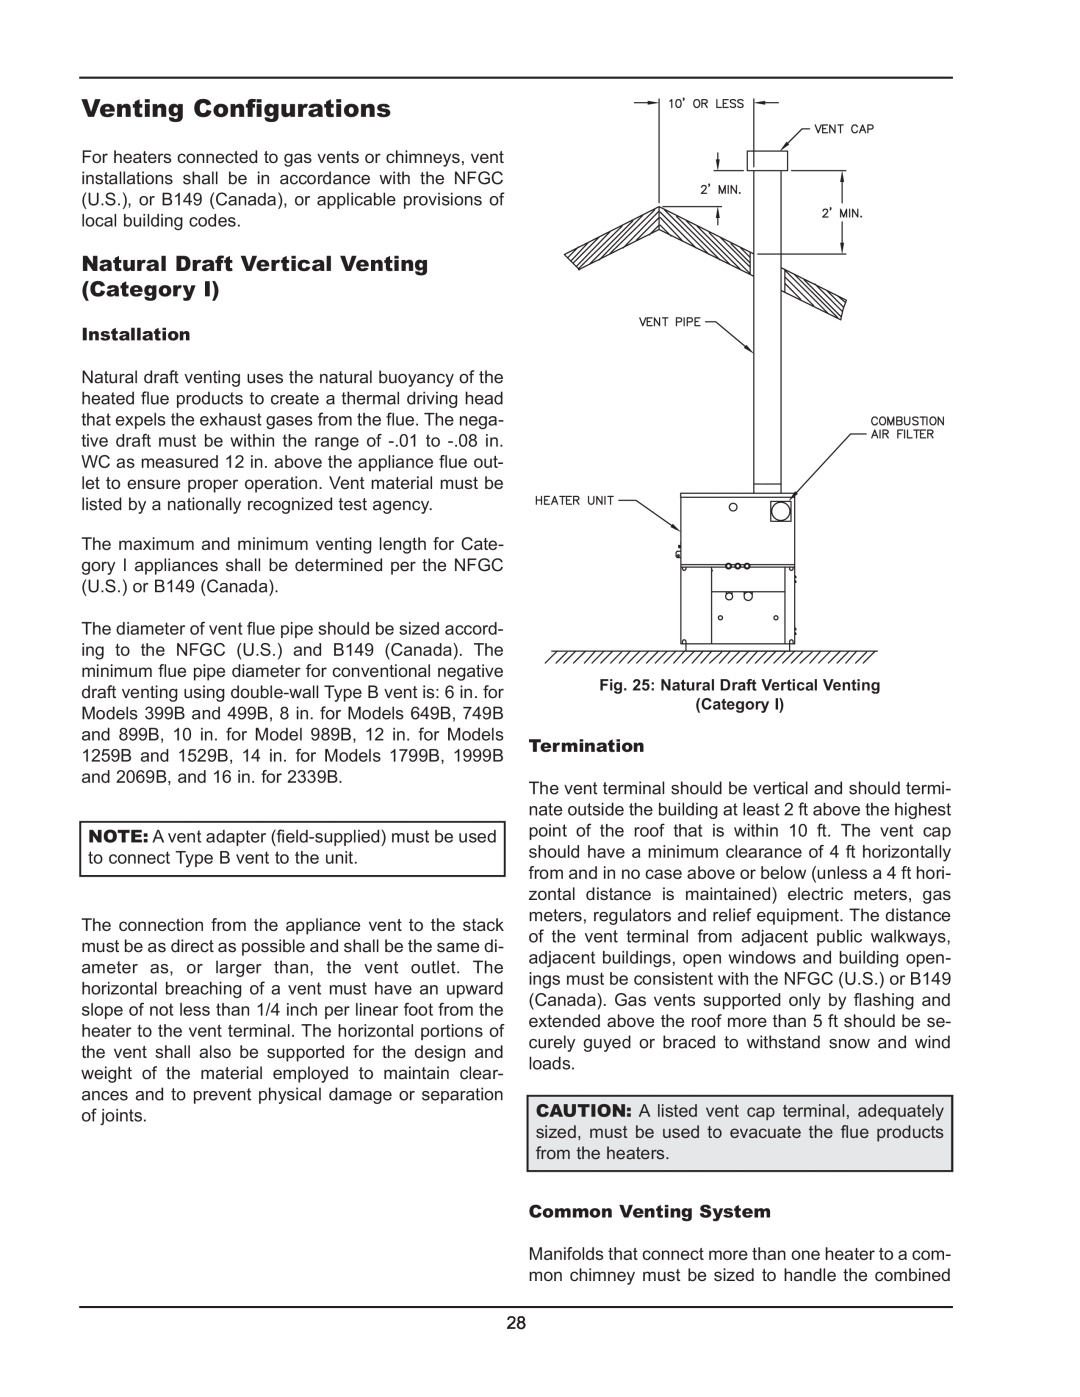 Raypak 399B-2339B operating instructions Venting Configurations, Natural Draft Vertical Venting Category 